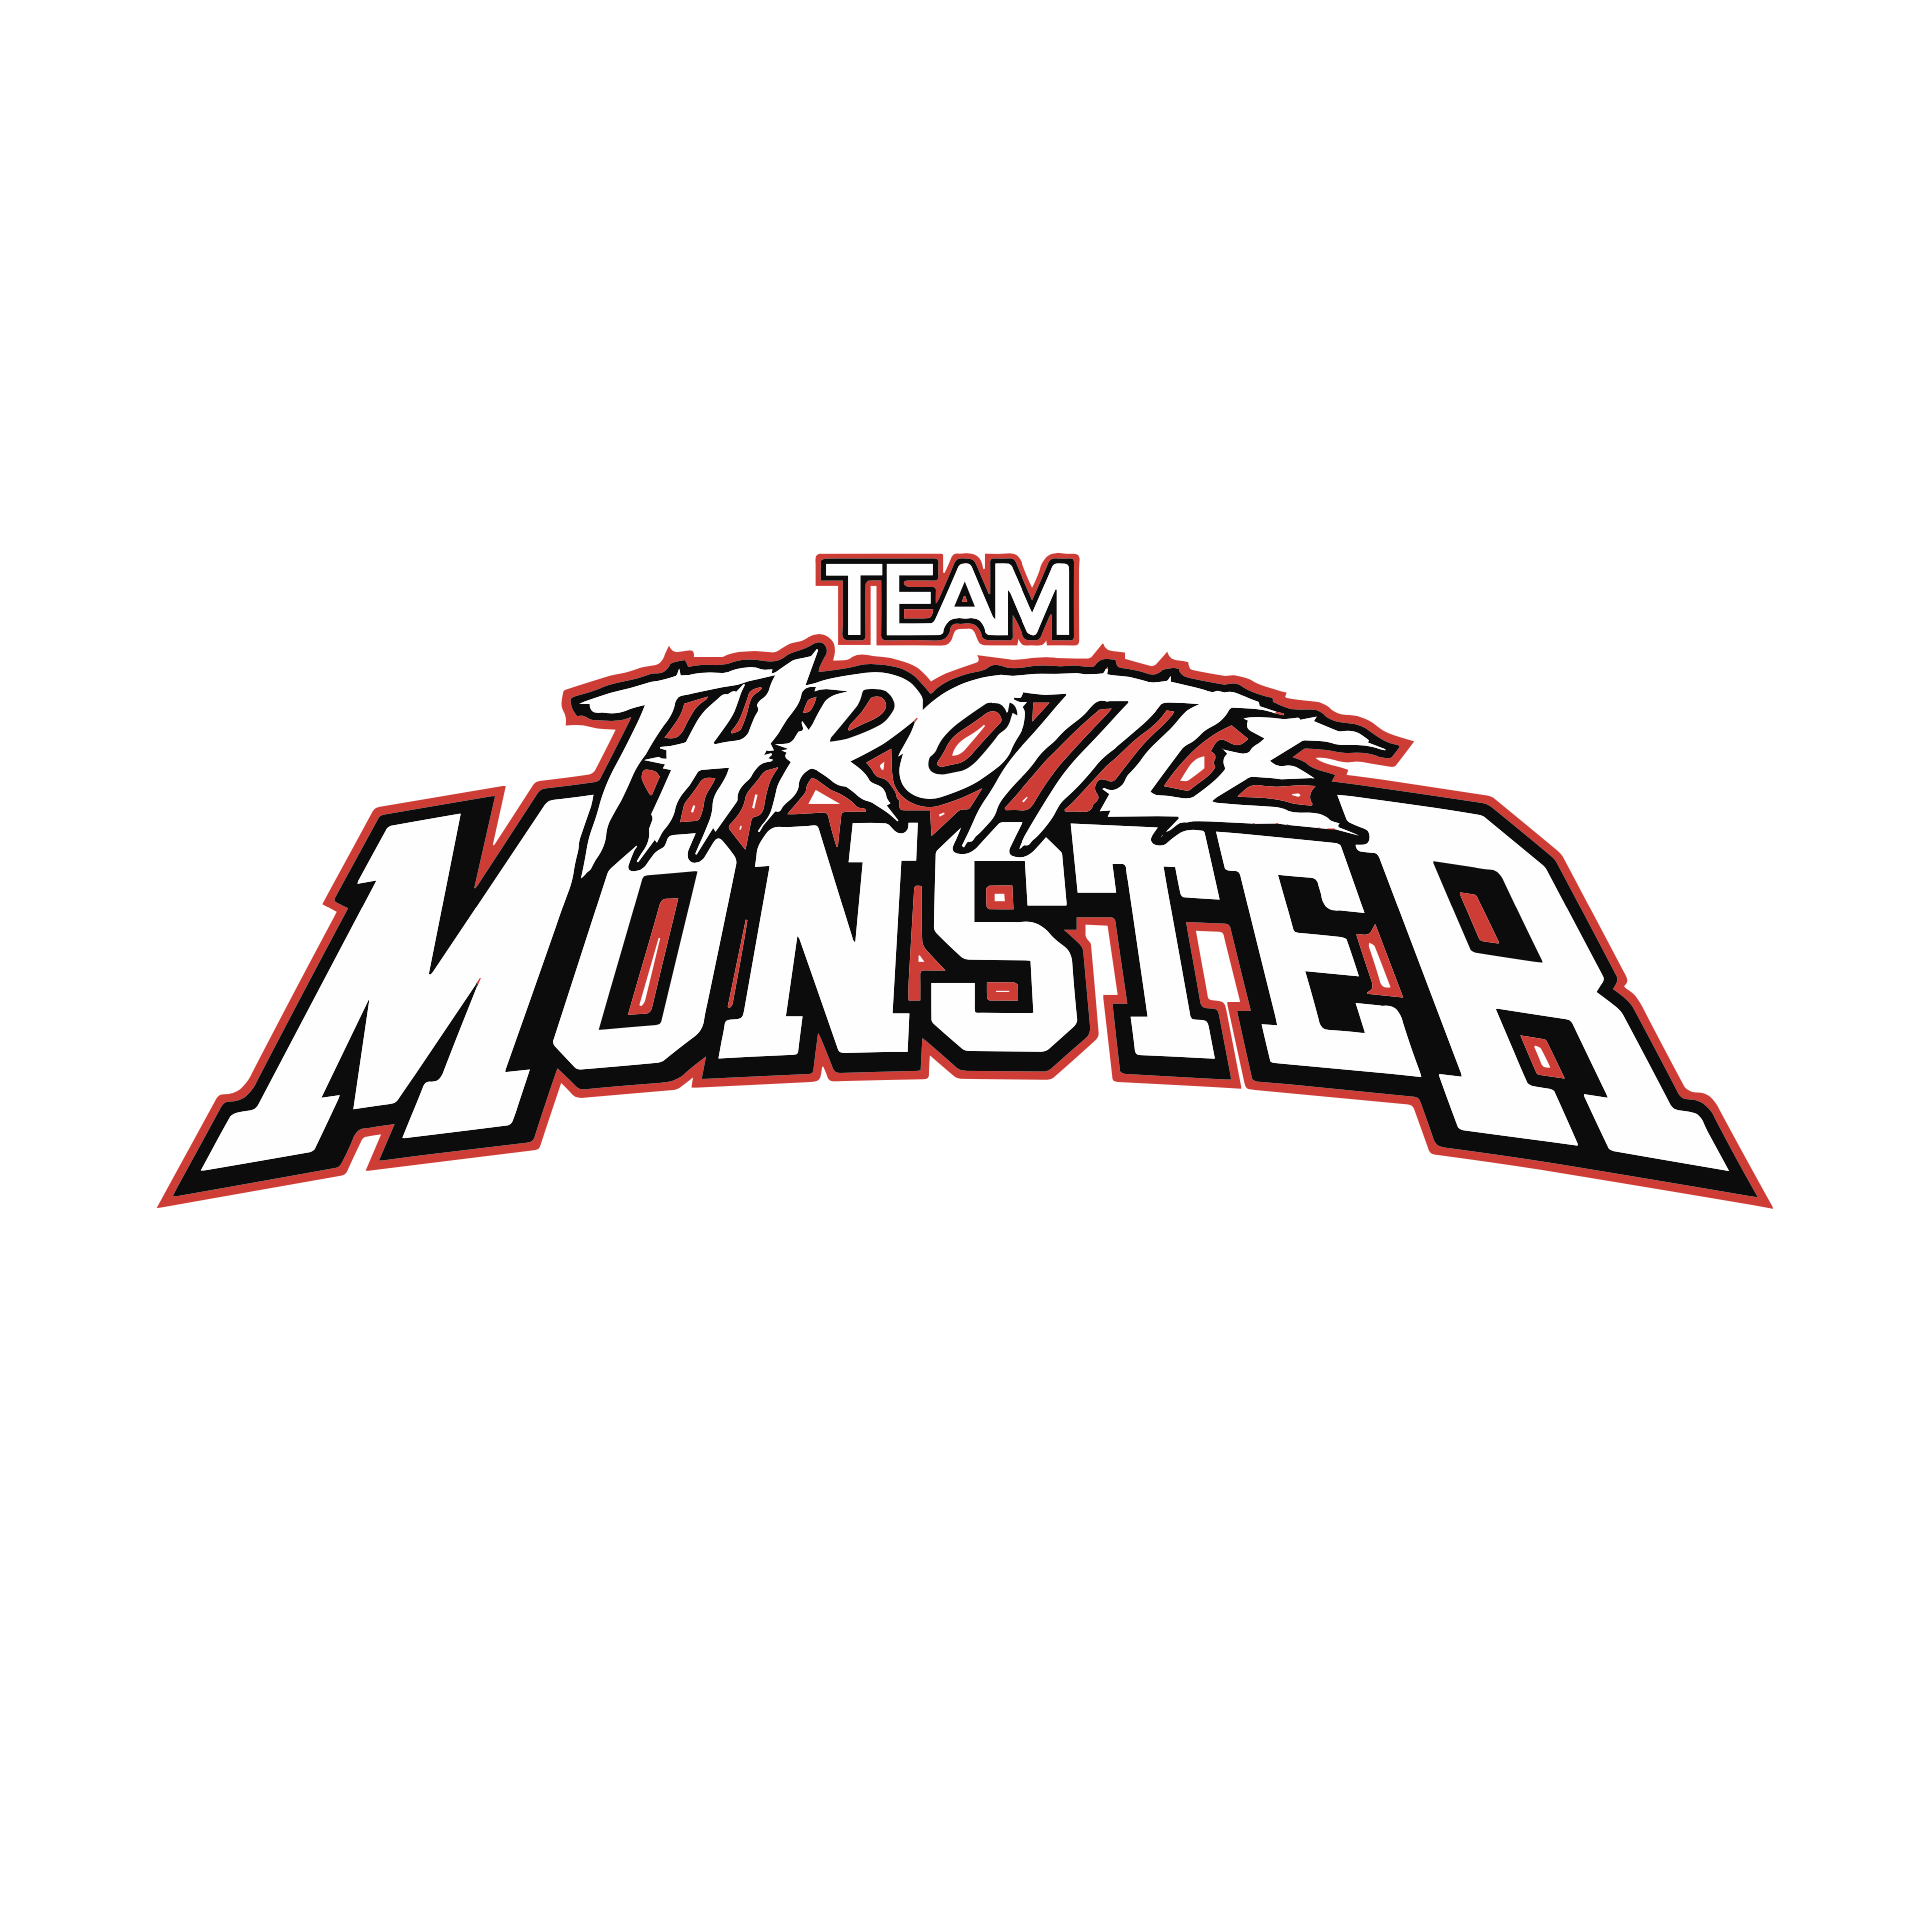 Team Throttle Monster to Become One of Biggest Teams in Professional Motorsports